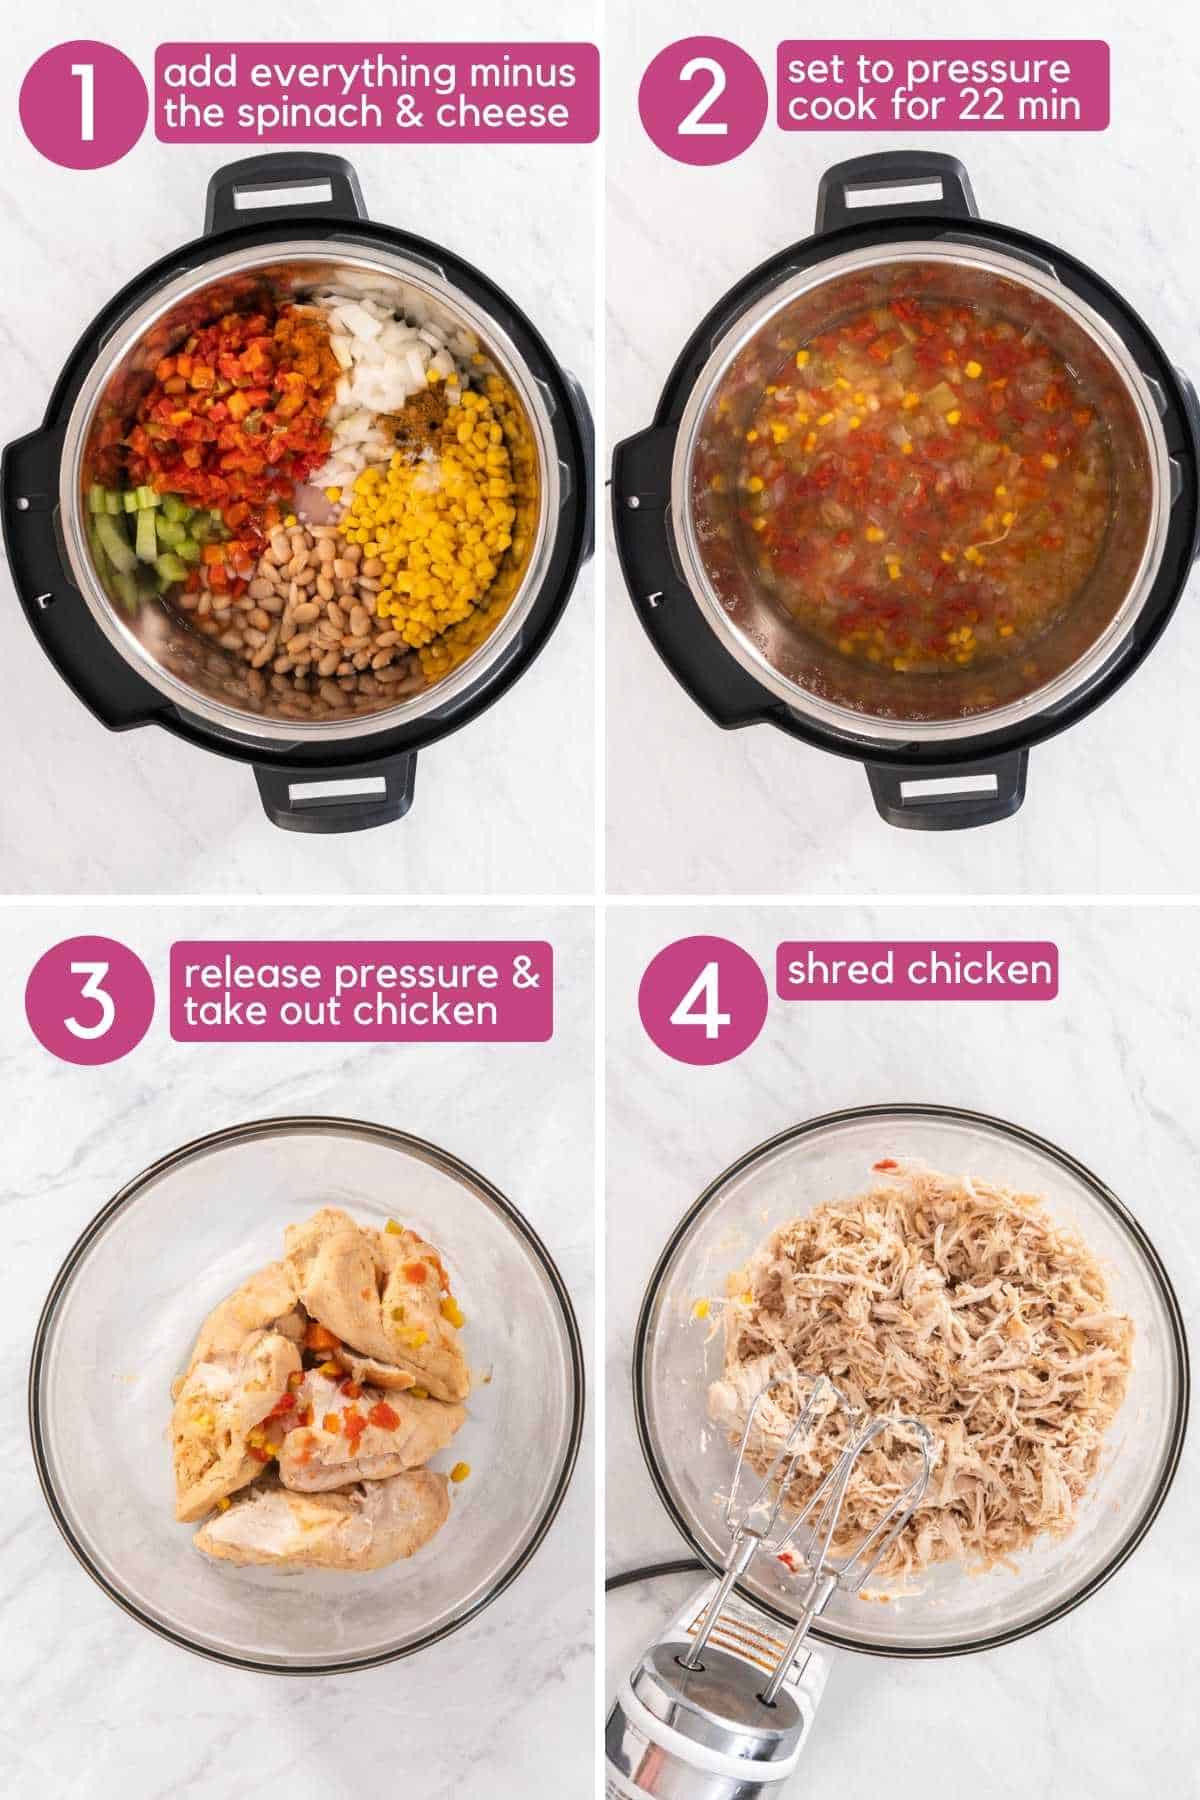 Add all ingredients to instant pot for white bean chicken chili and cook for 22 minutes then shred chicken.